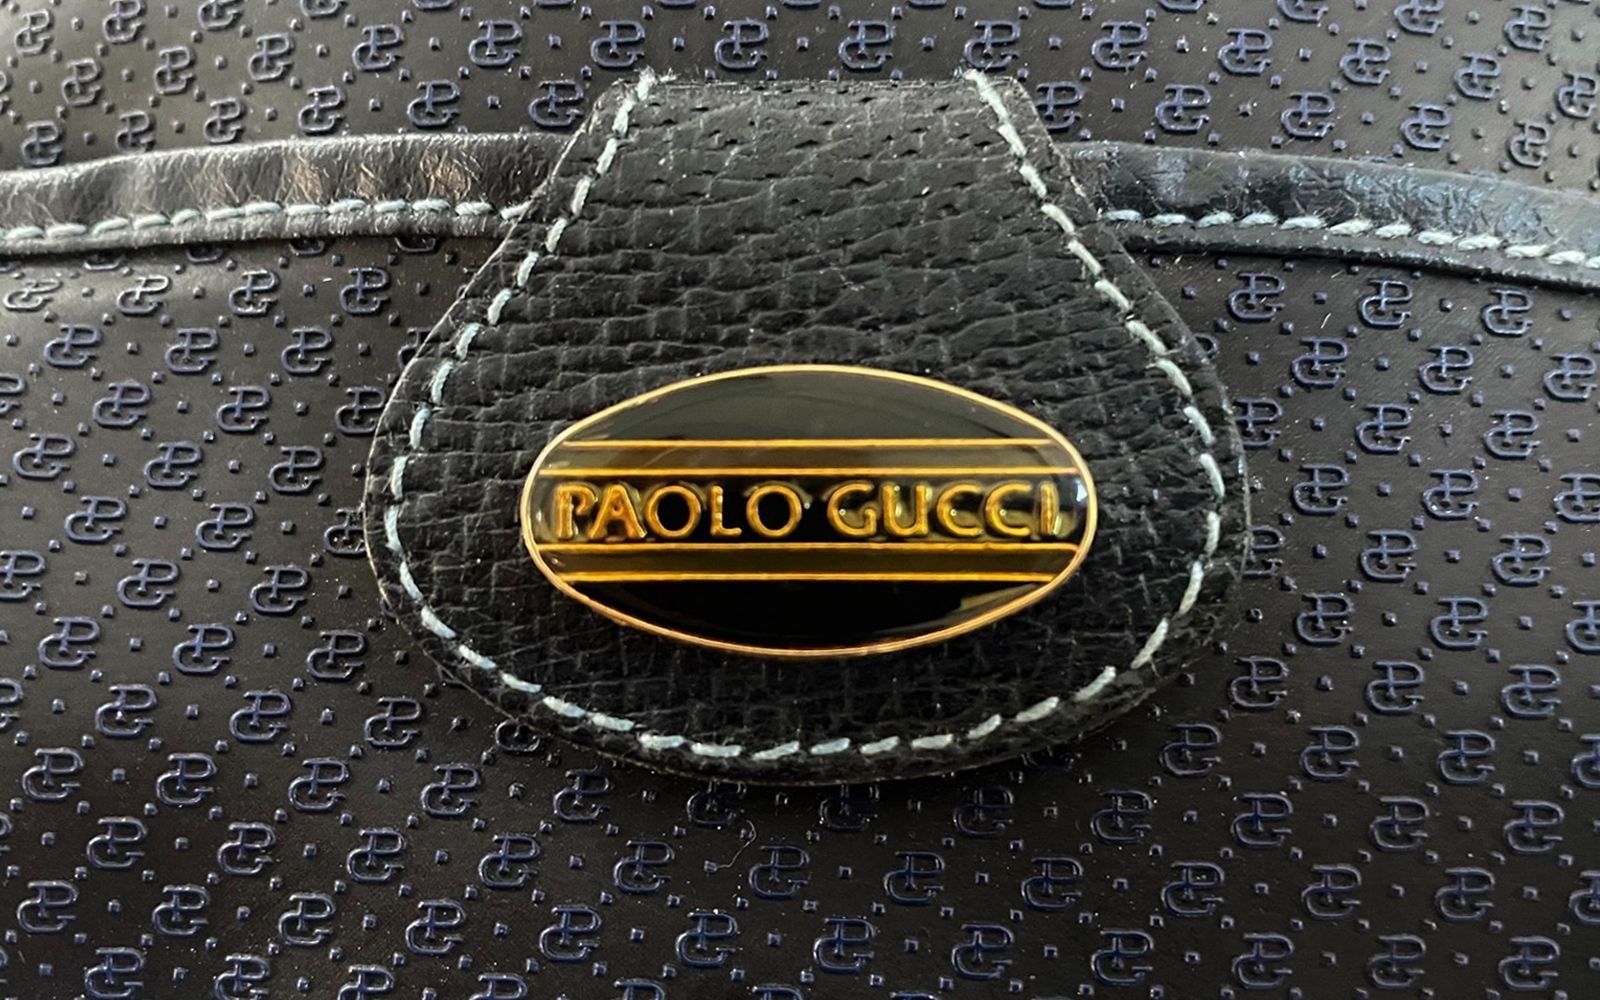 Redefining the narrative about the story of Paolo Gucci